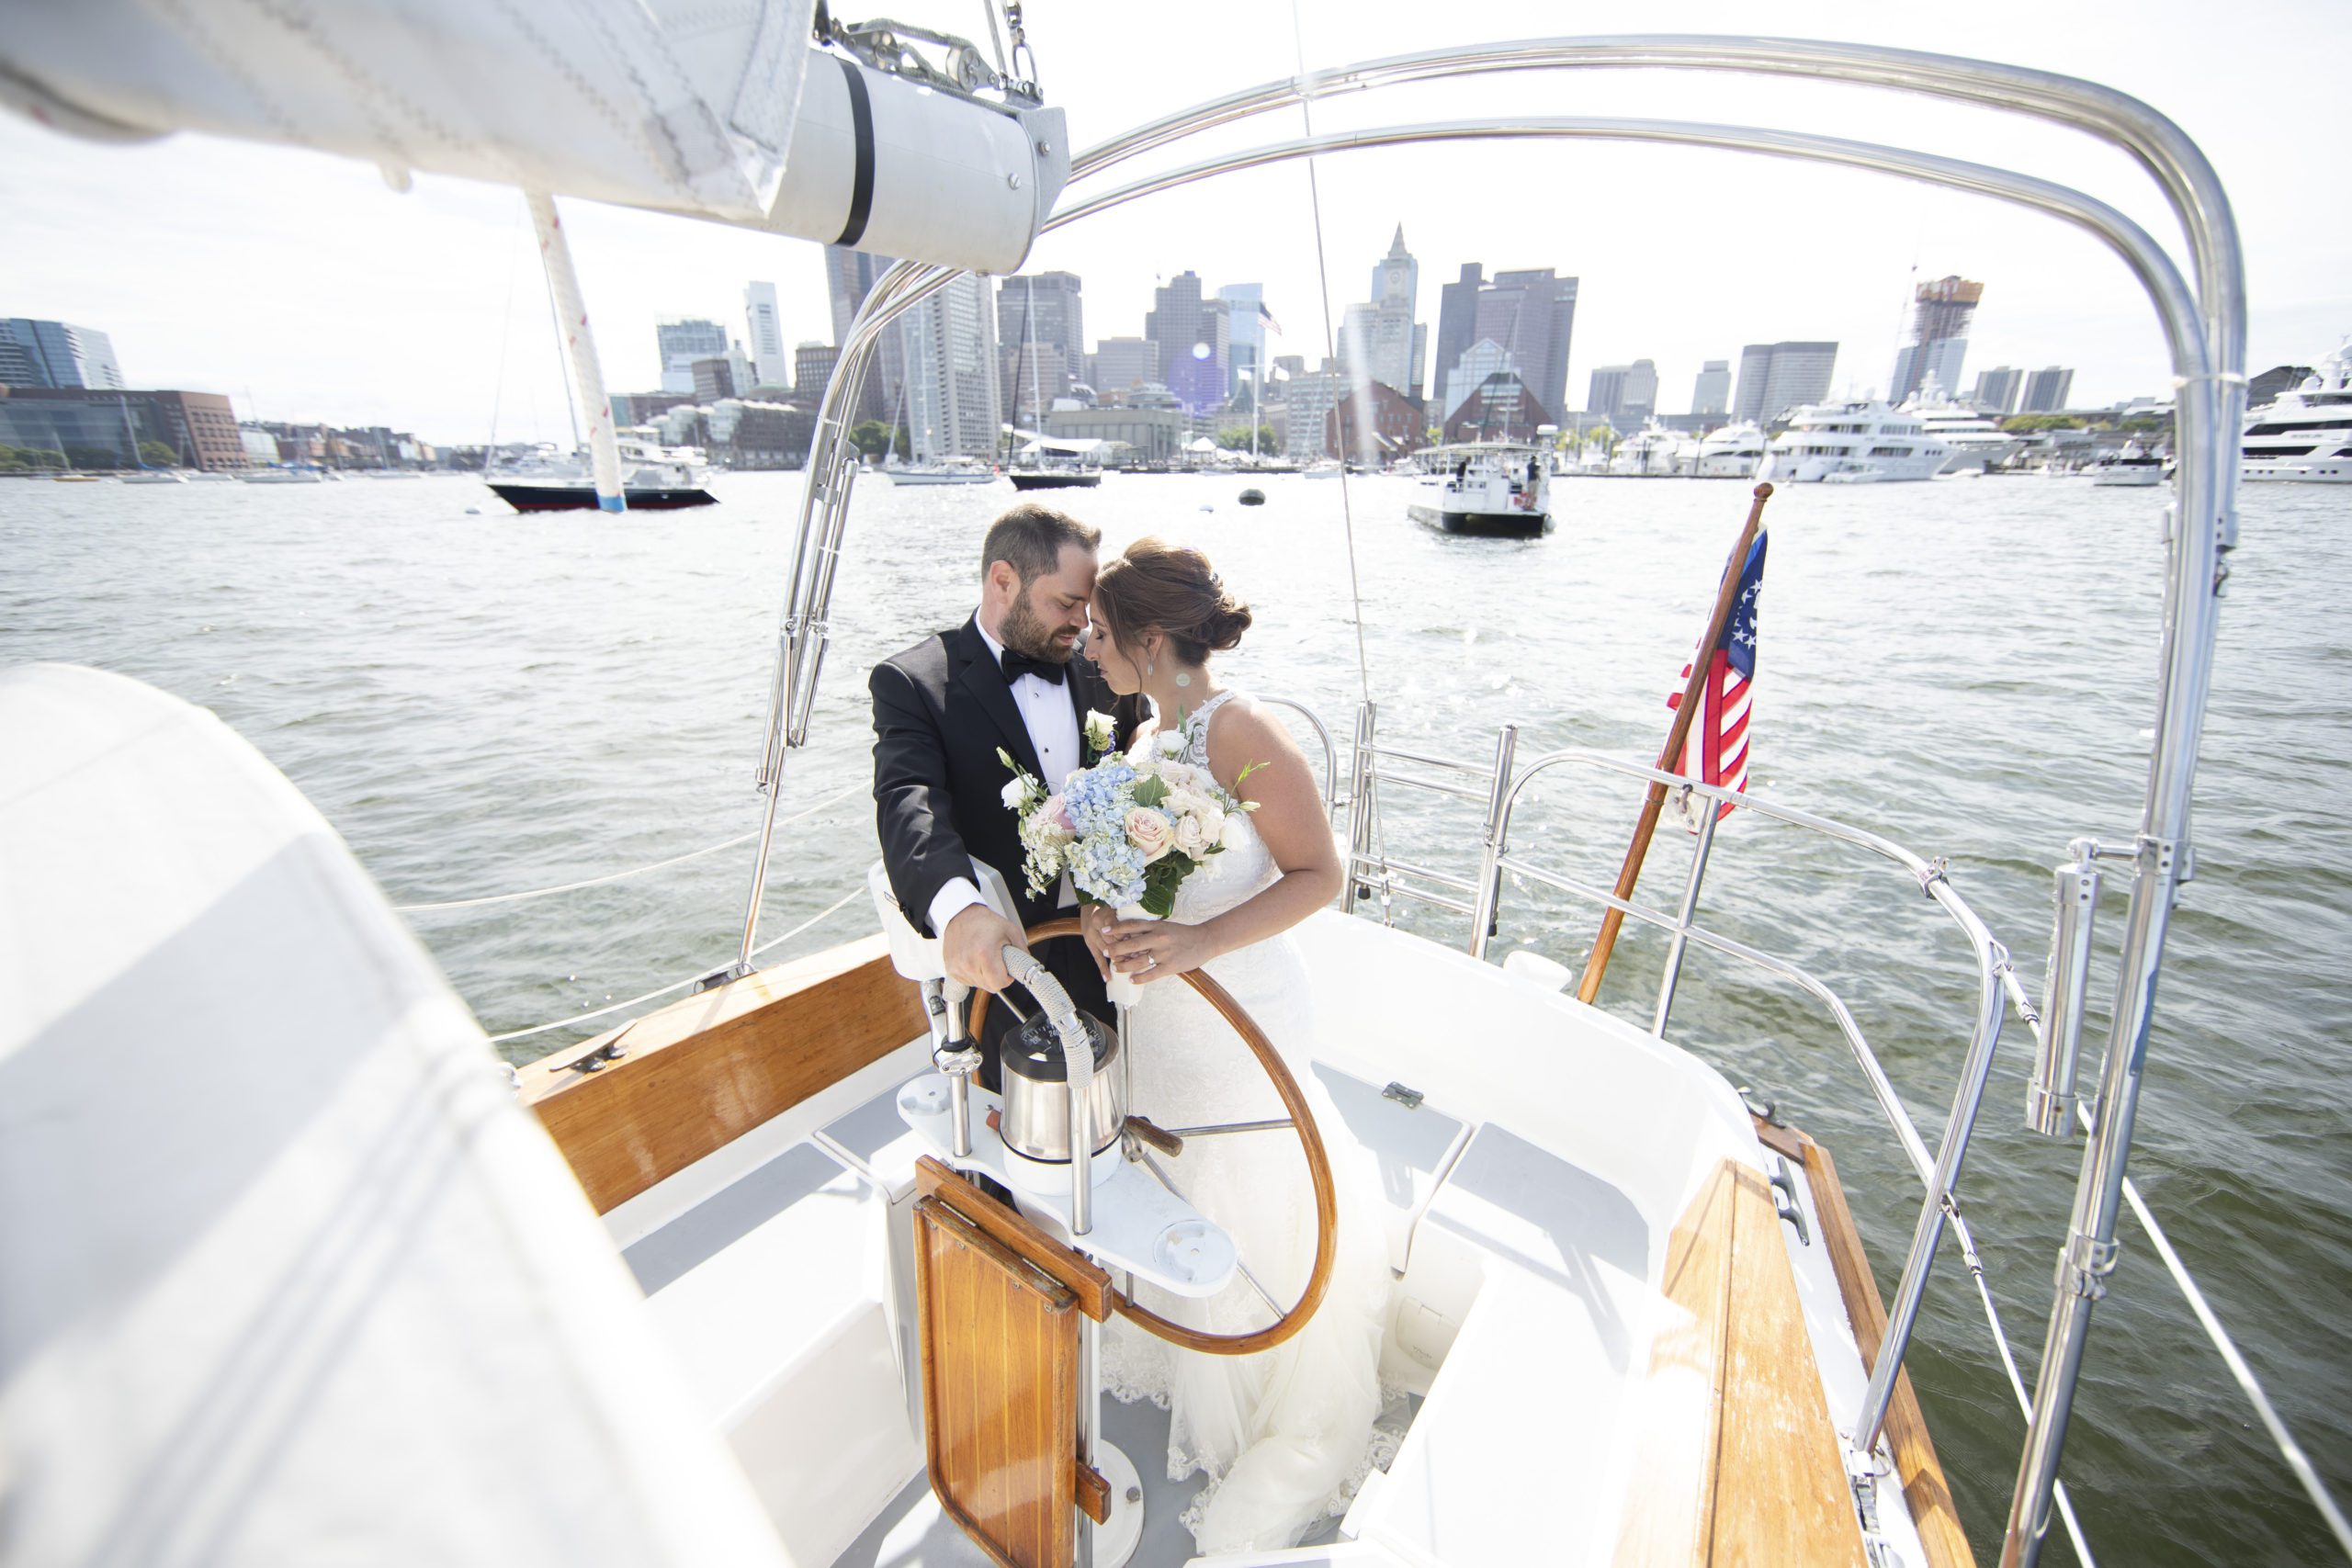 Kerry Goodwin Photography bride and groom on boat